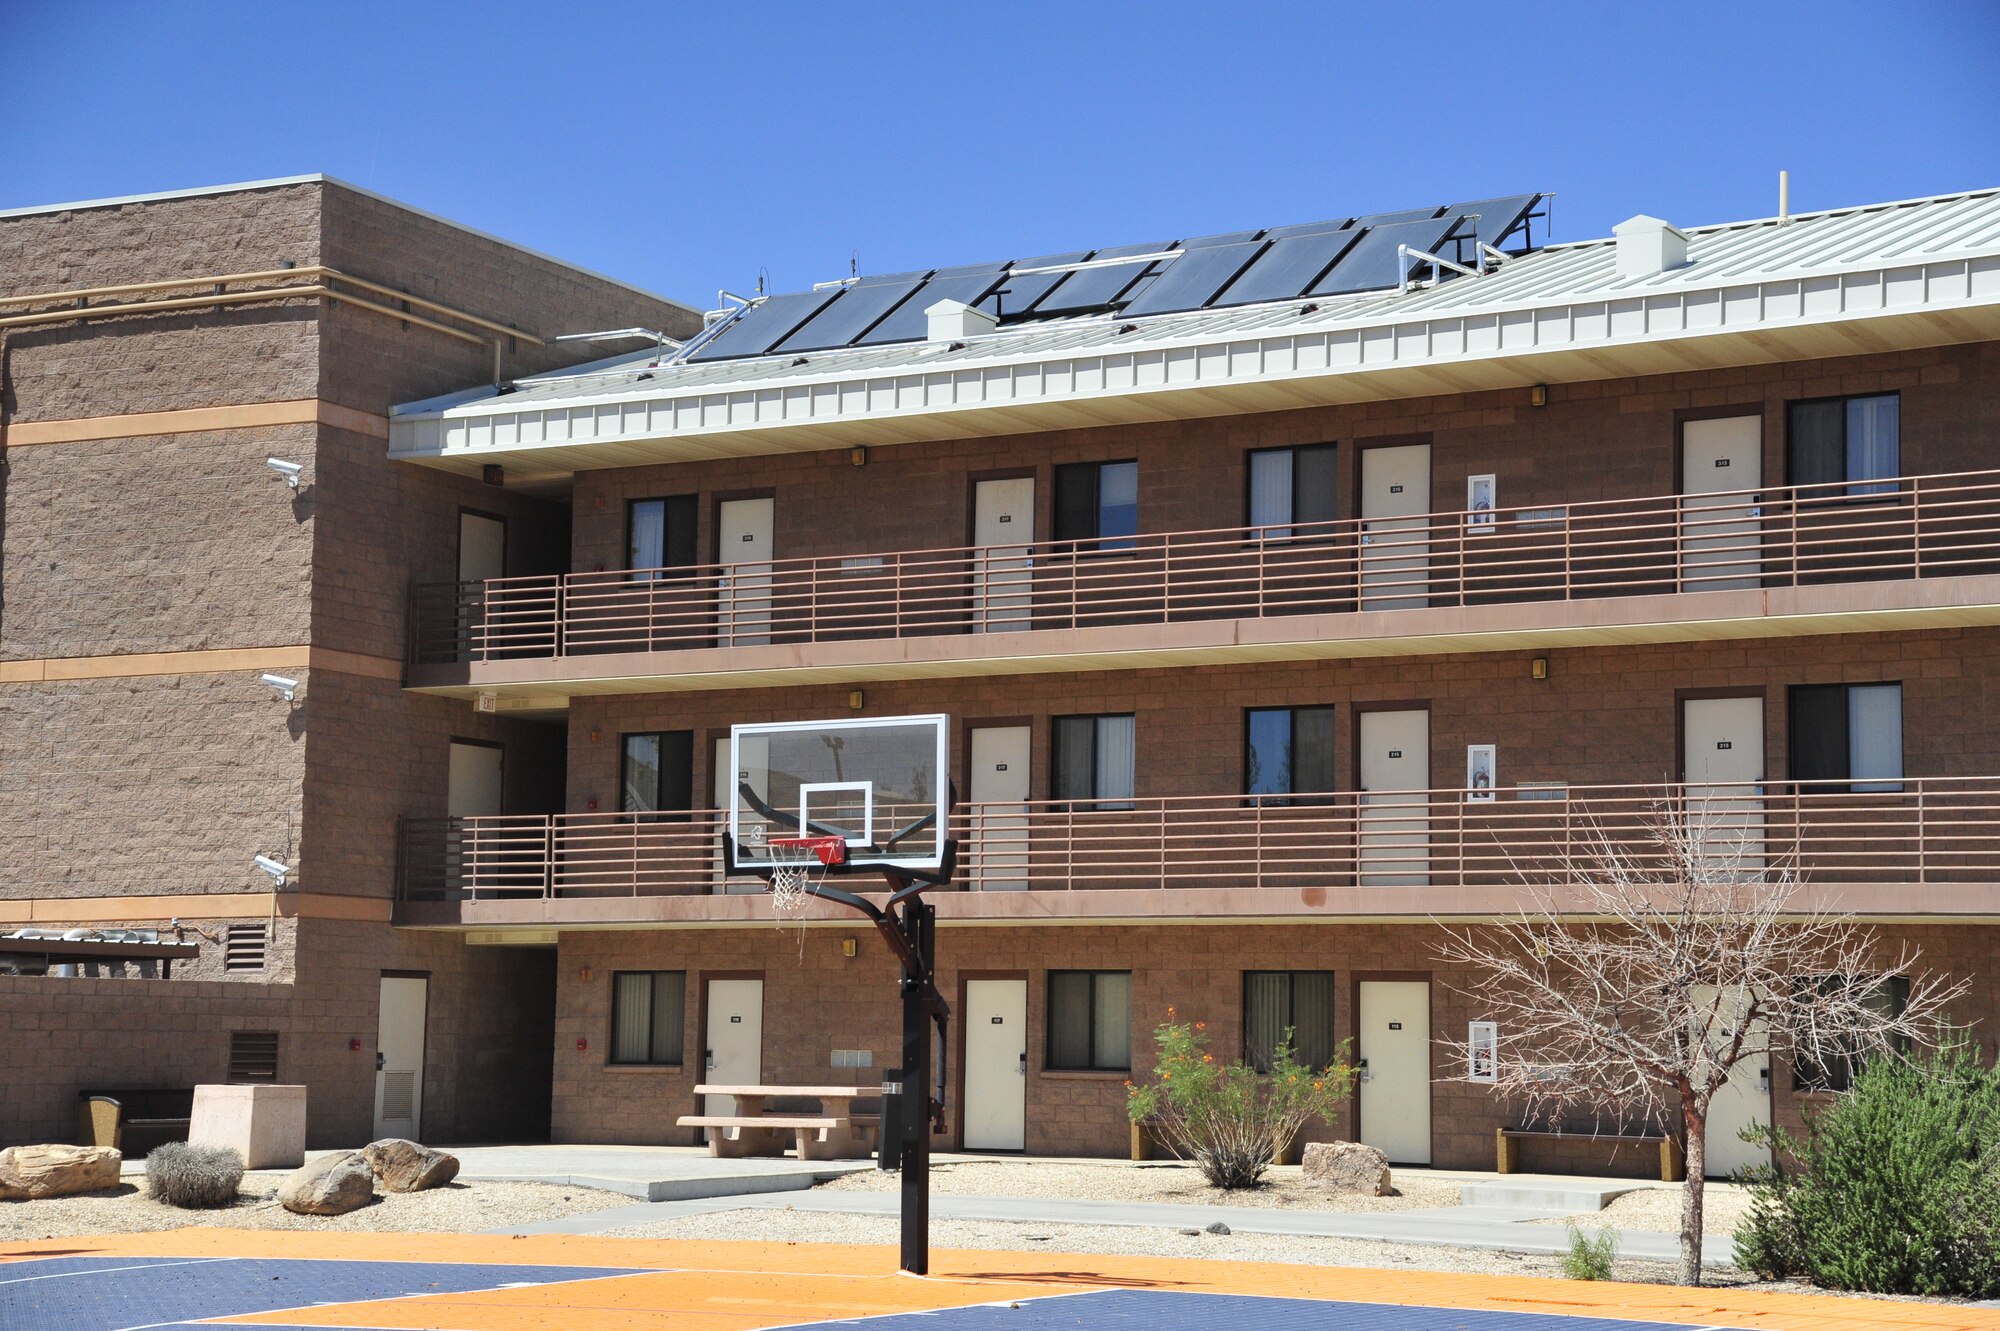 A solar array panel stands on a dormitory roof Sept. 3 at Luke Air Force Base. There are currently four active solar arrays on base. The solar array shown will produce hot water to the dormitory. (U.S. Air Force photo/Senior Airman Grace Lee)